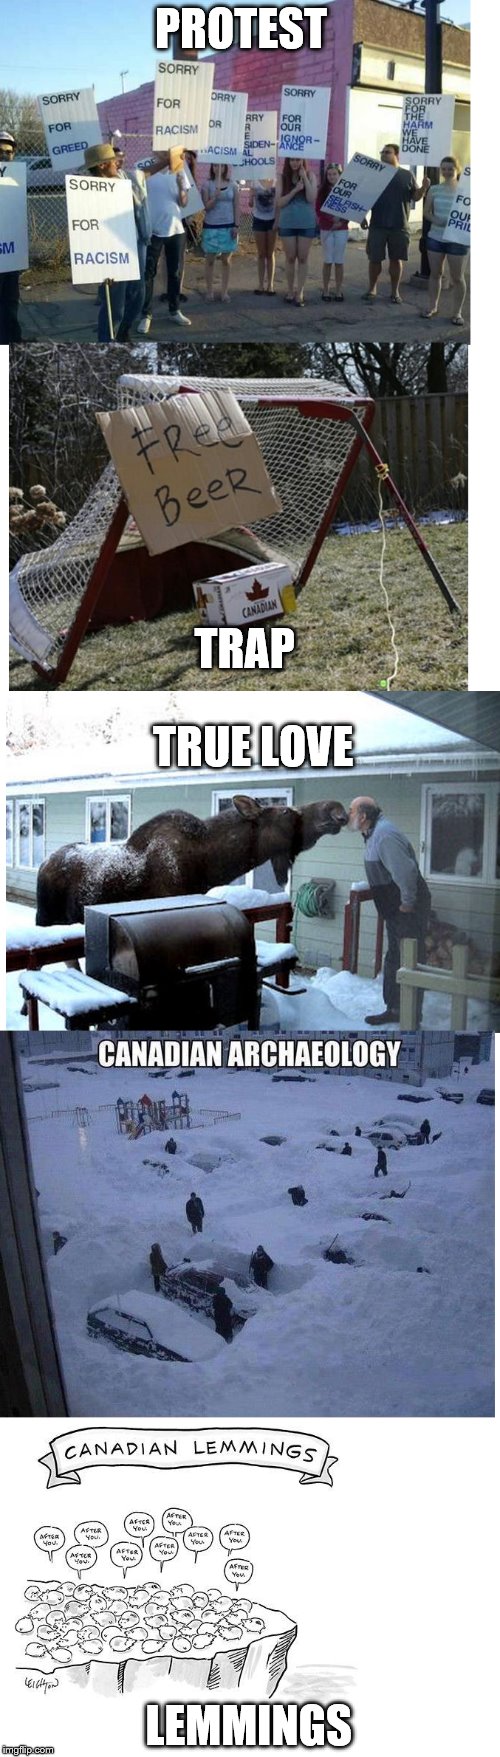 PROTEST; TRAP; TRUE LOVE; LEMMINGS | image tagged in memes,canadian,funny | made w/ Imgflip meme maker